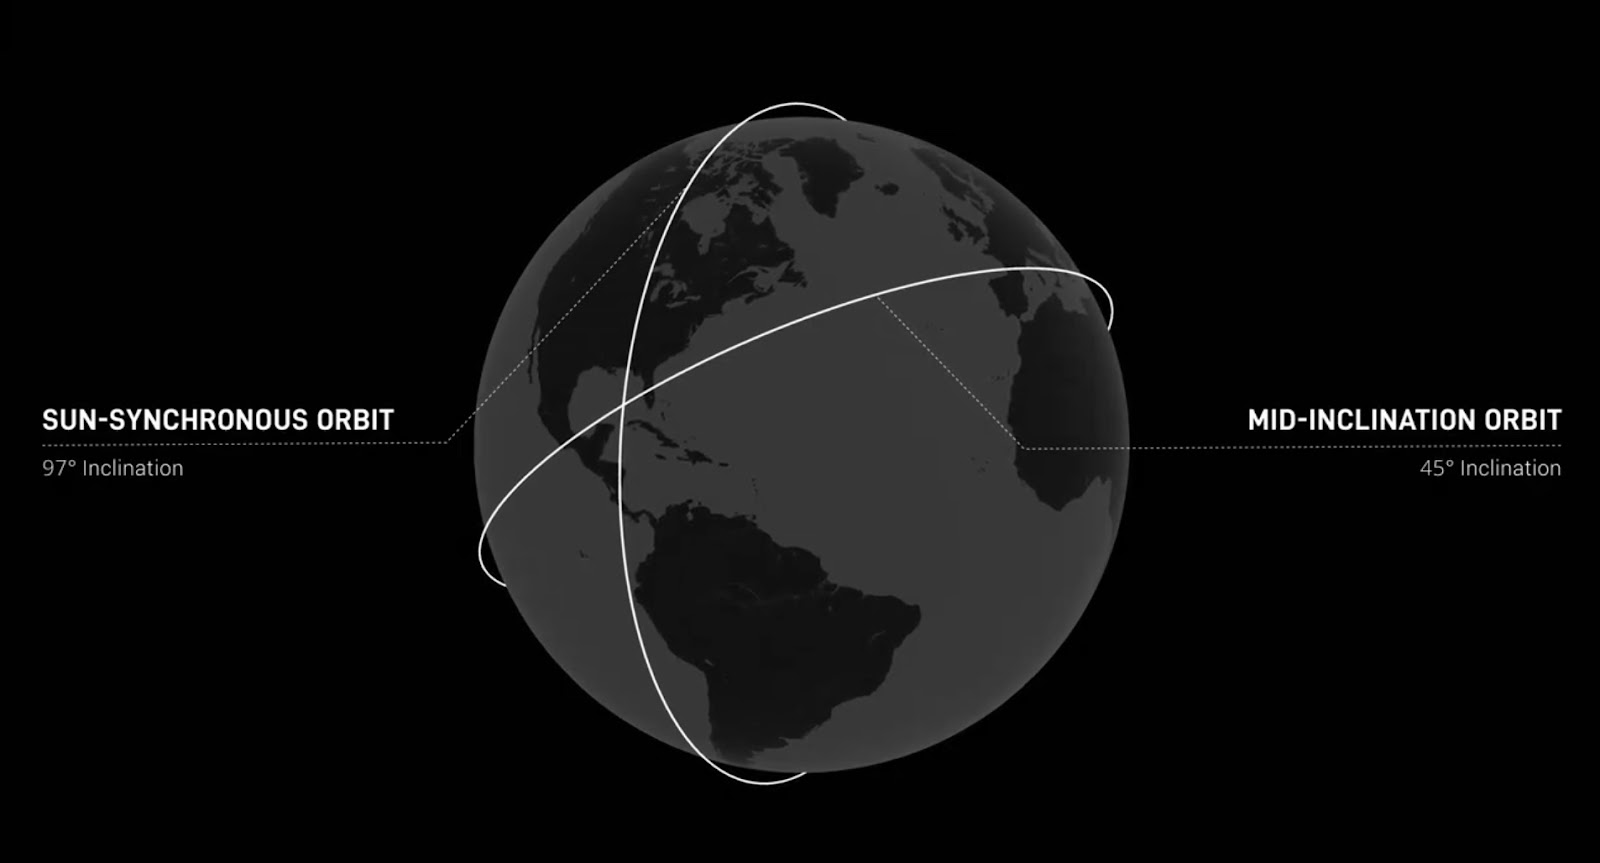 Illustration of earth showing two satellite orbits: a sun-synchronous orbit at 97° inclination and a mid-inclination orbit at 45° inclination.